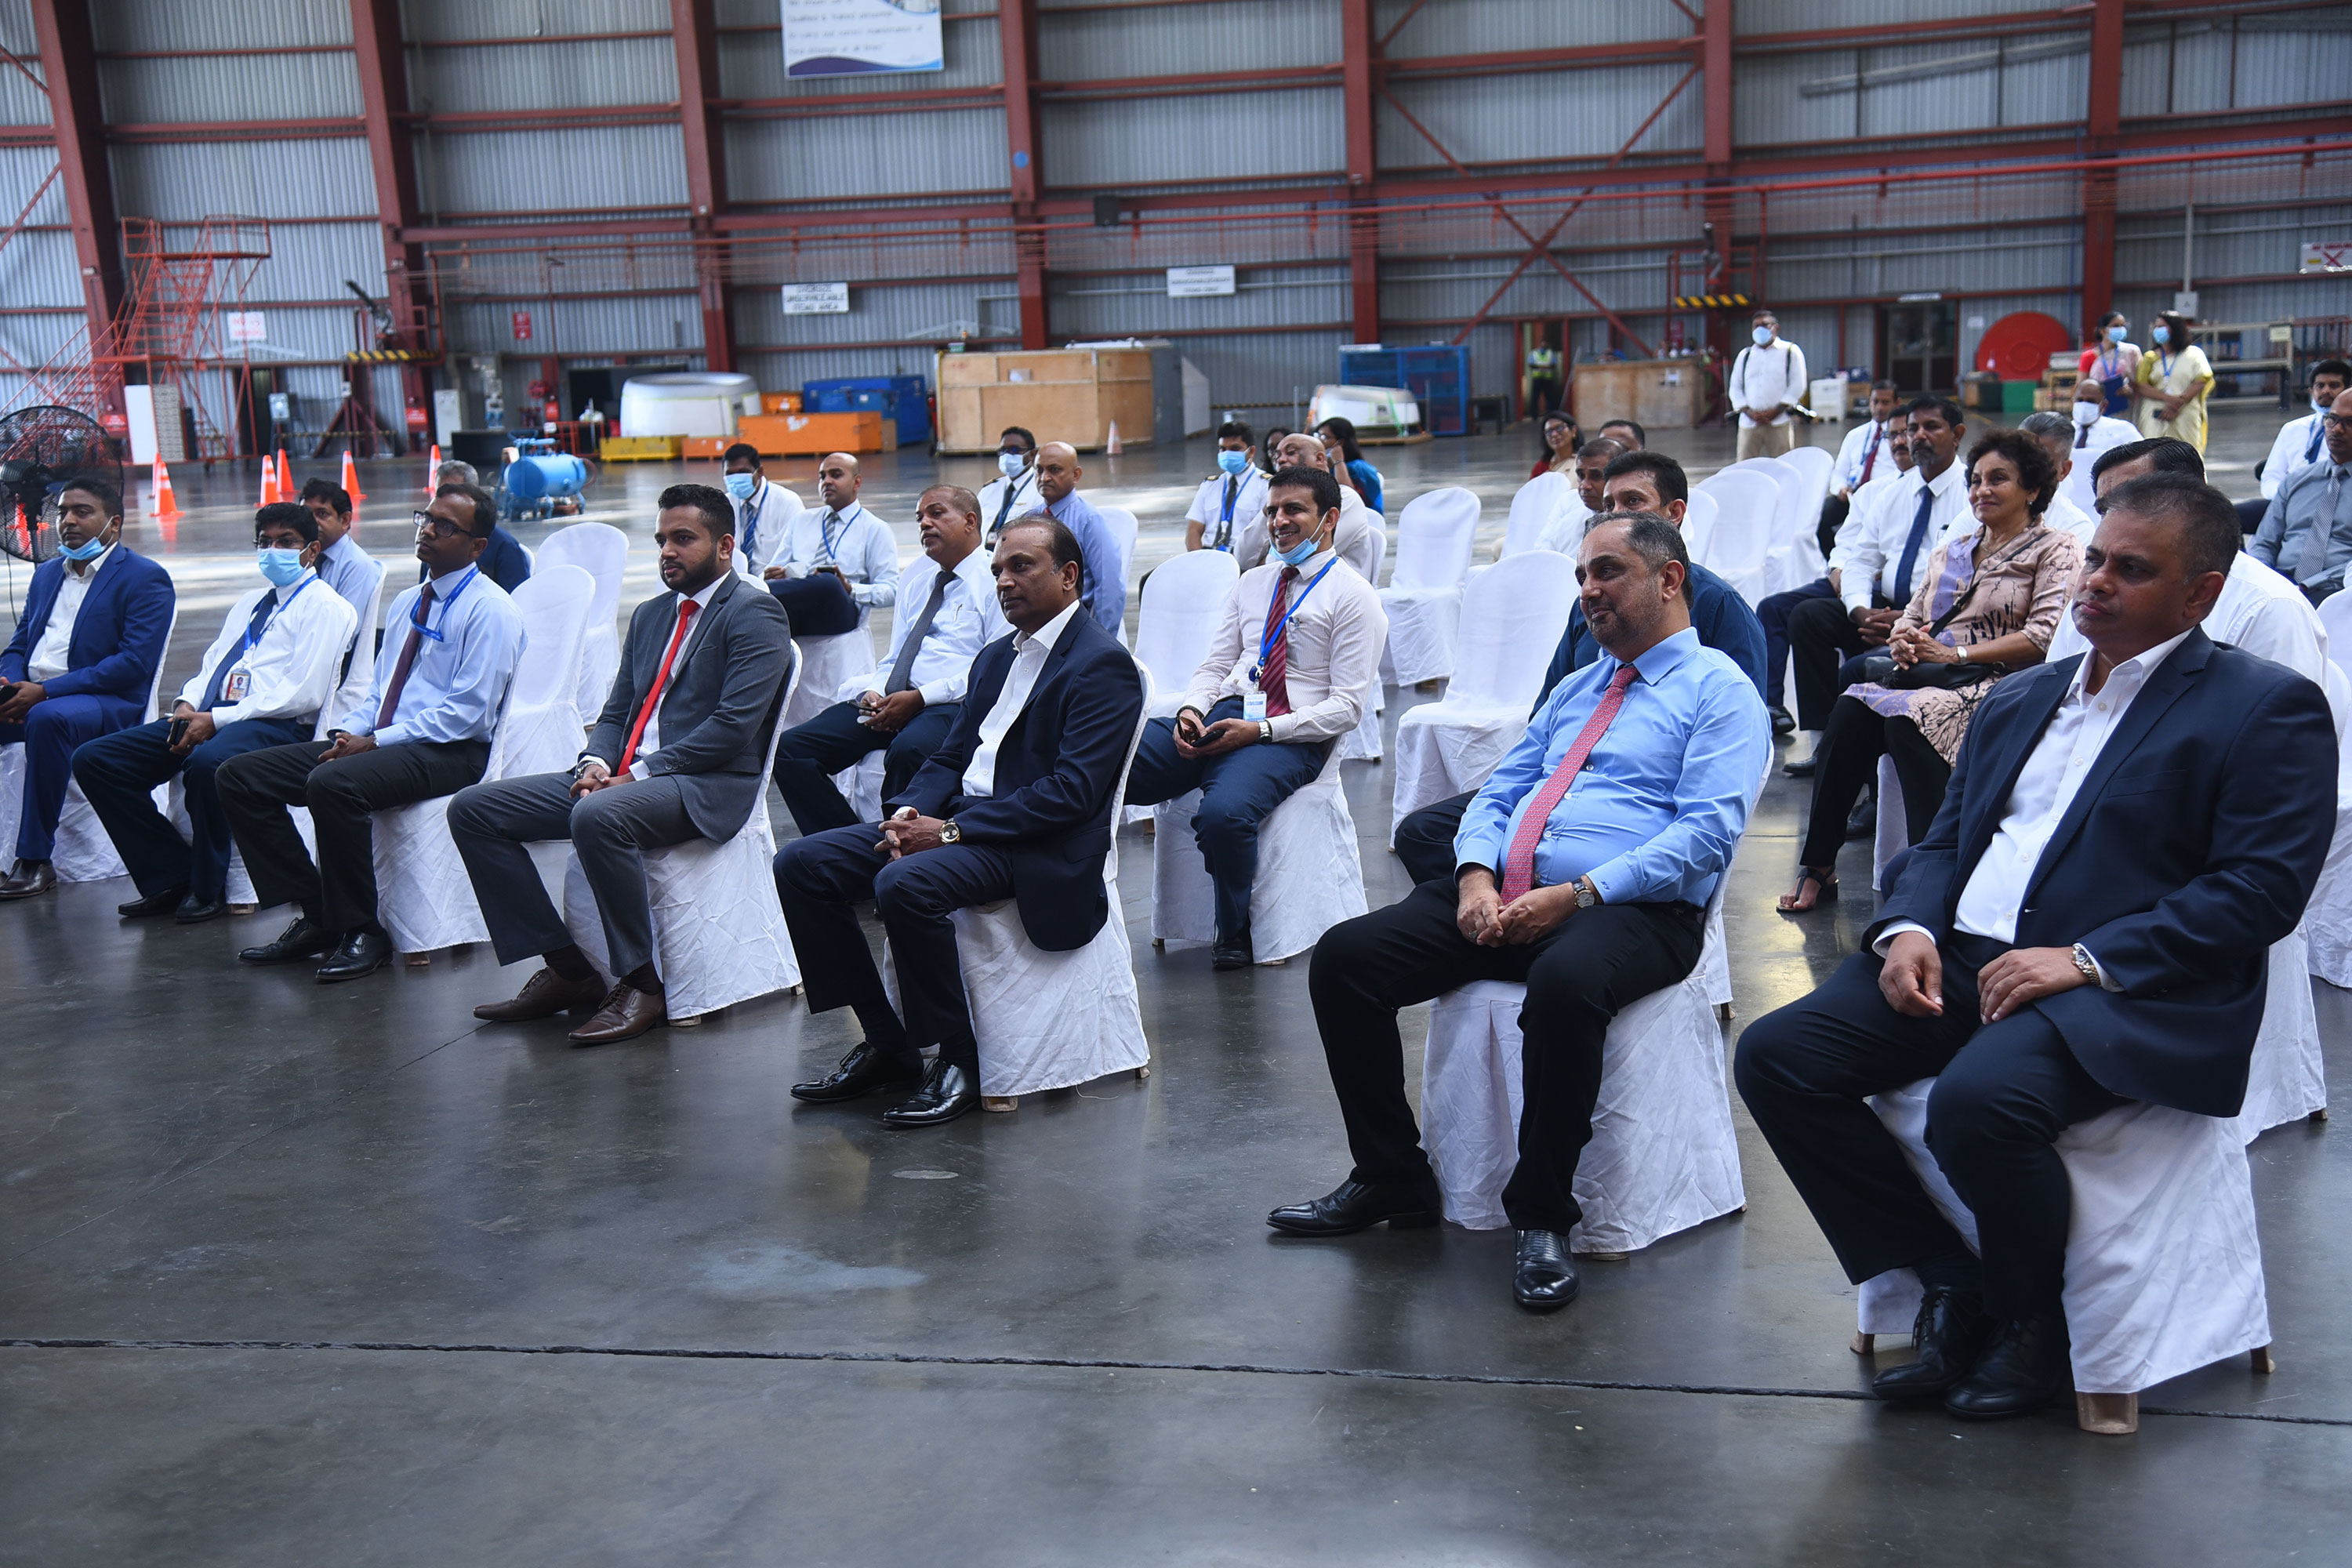 Guests and invitees from the corporate world at the launch of the SriLankan Cargo’s wide body A330-200 freighter aircraft